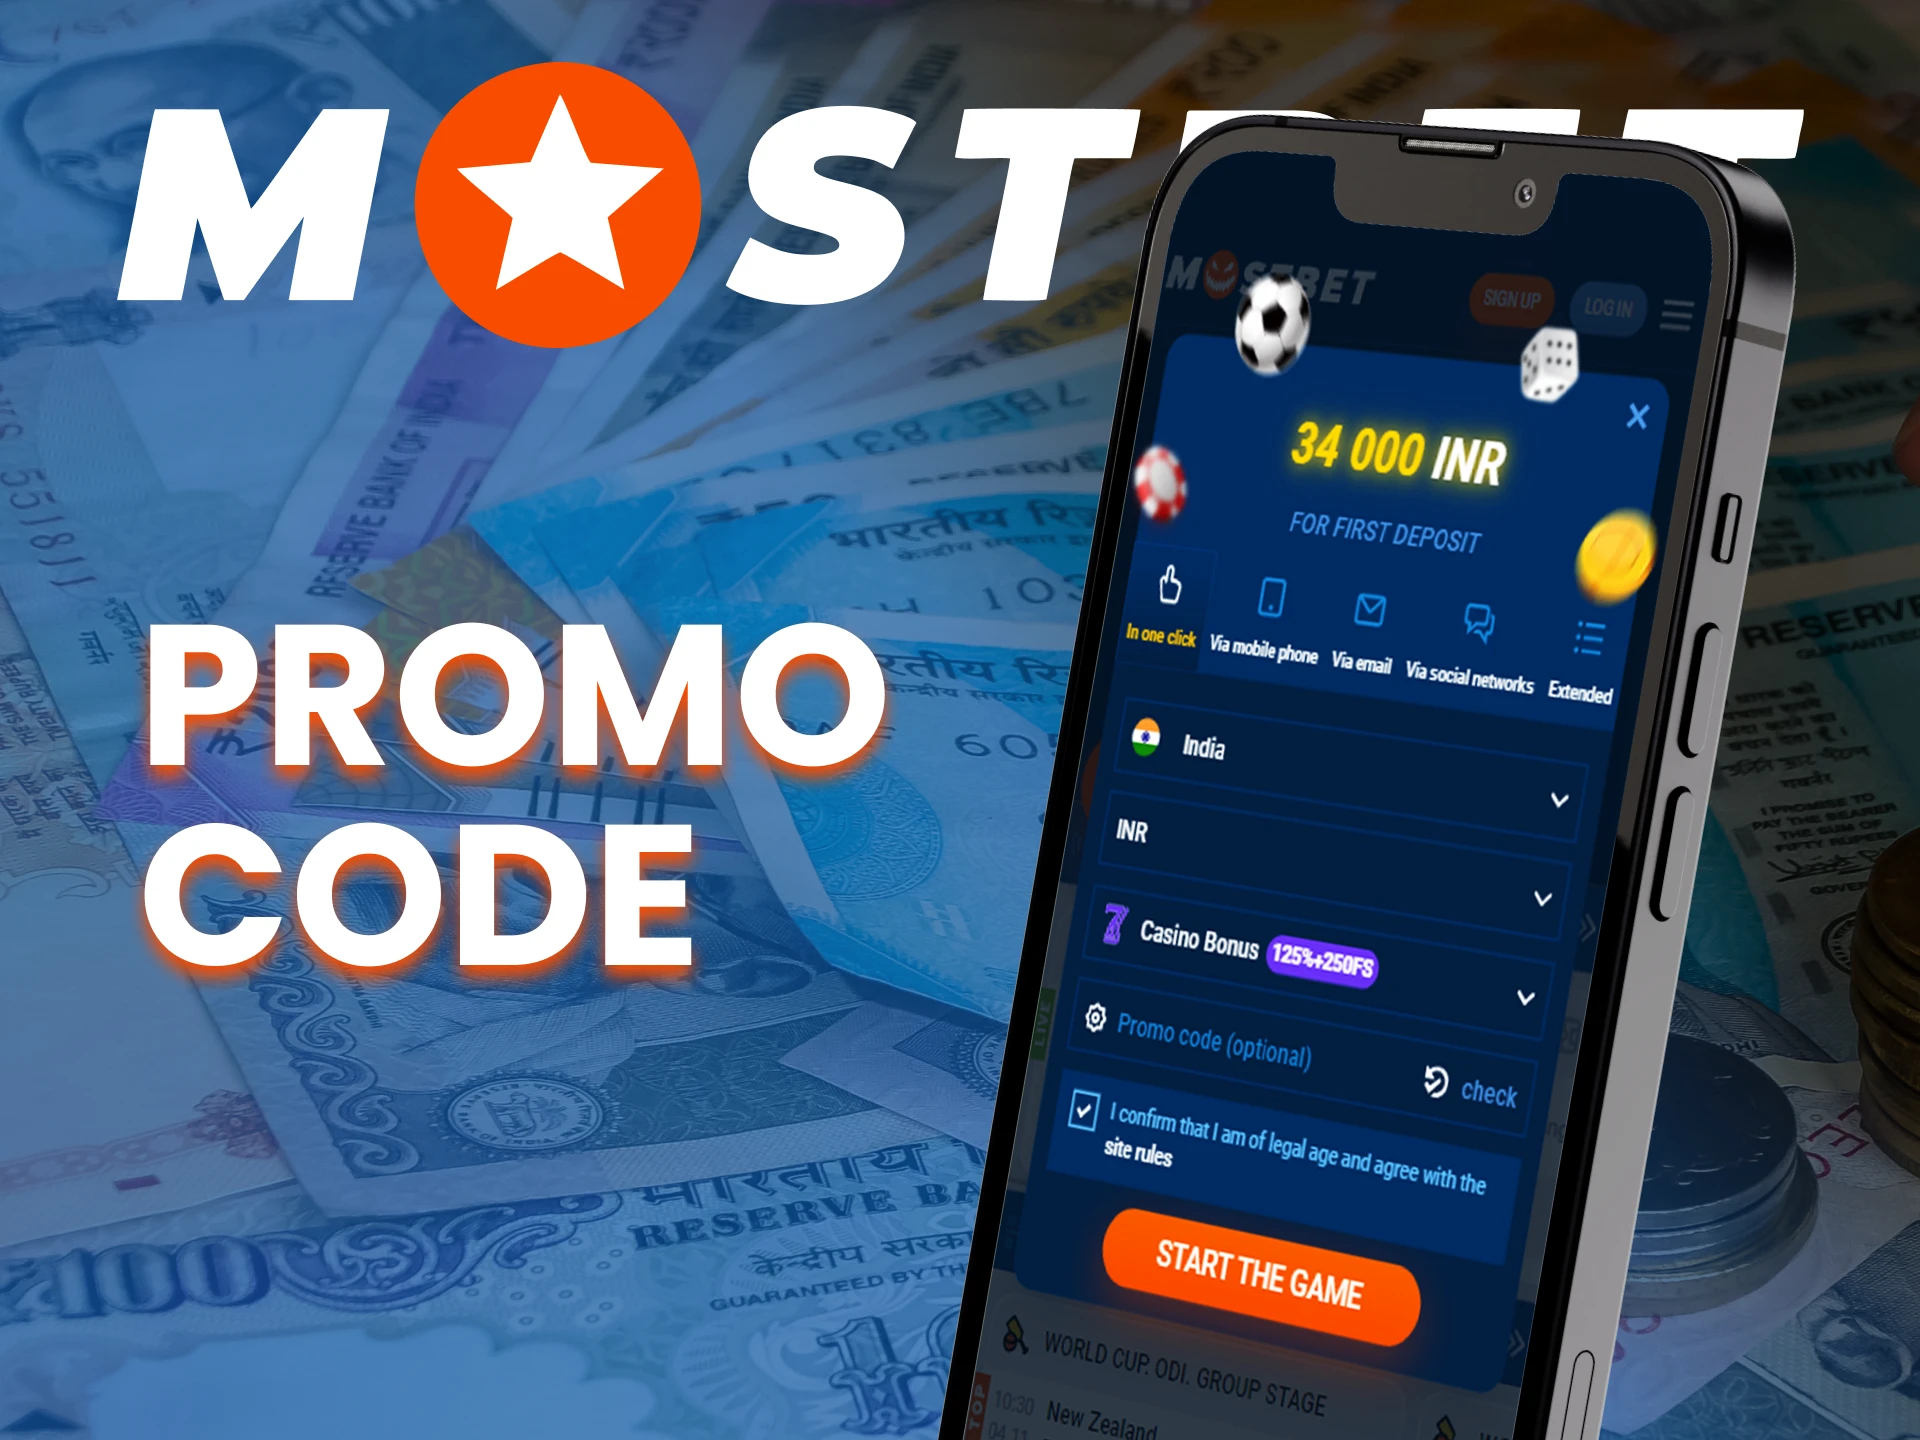 At Mostbet app be sure to use a promo code to get an extra benefit.